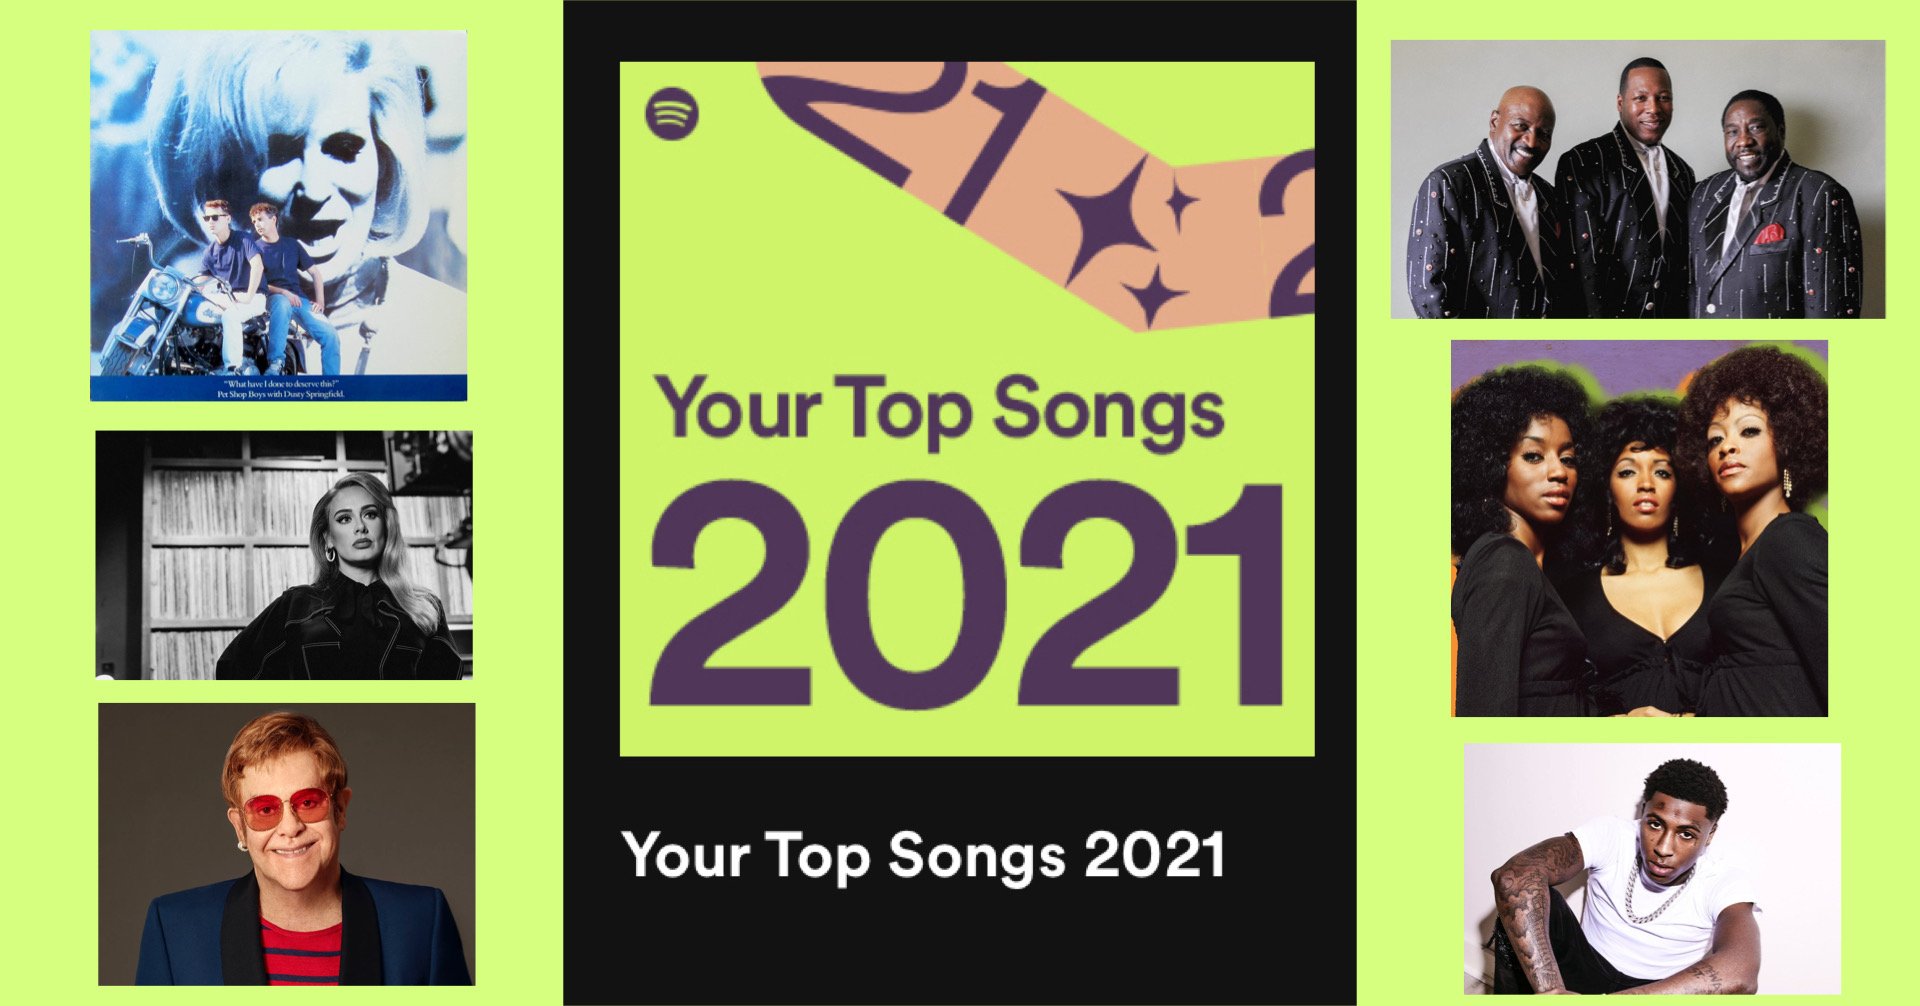 I listened to a LOT of spotify this year, also MY LIST to you! Was